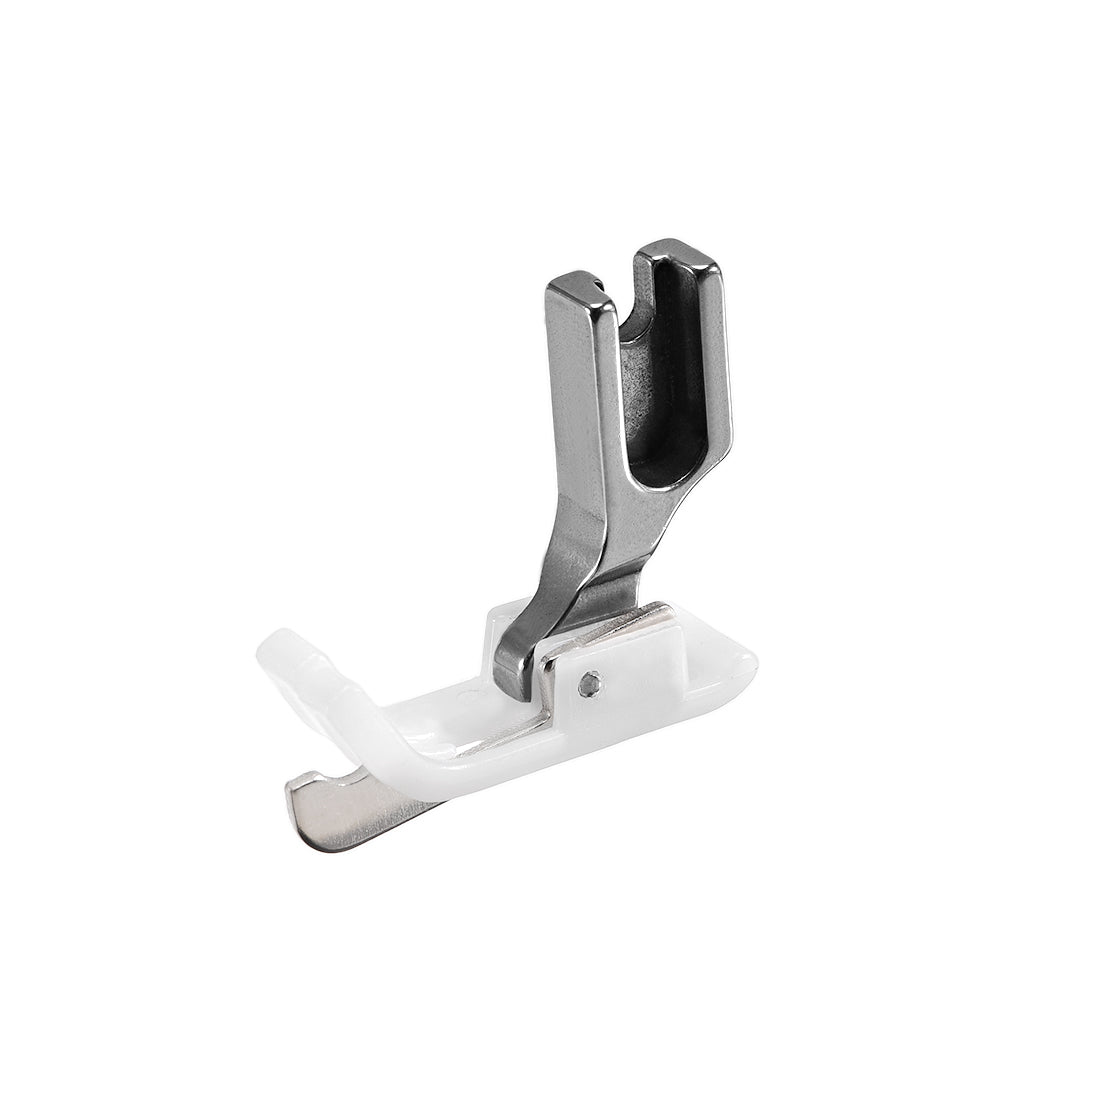 uxcell Uxcell #SP-18 Industrial Sewing Machine Hinged Presser Foot with Right Guide 1/16" (2mm) White